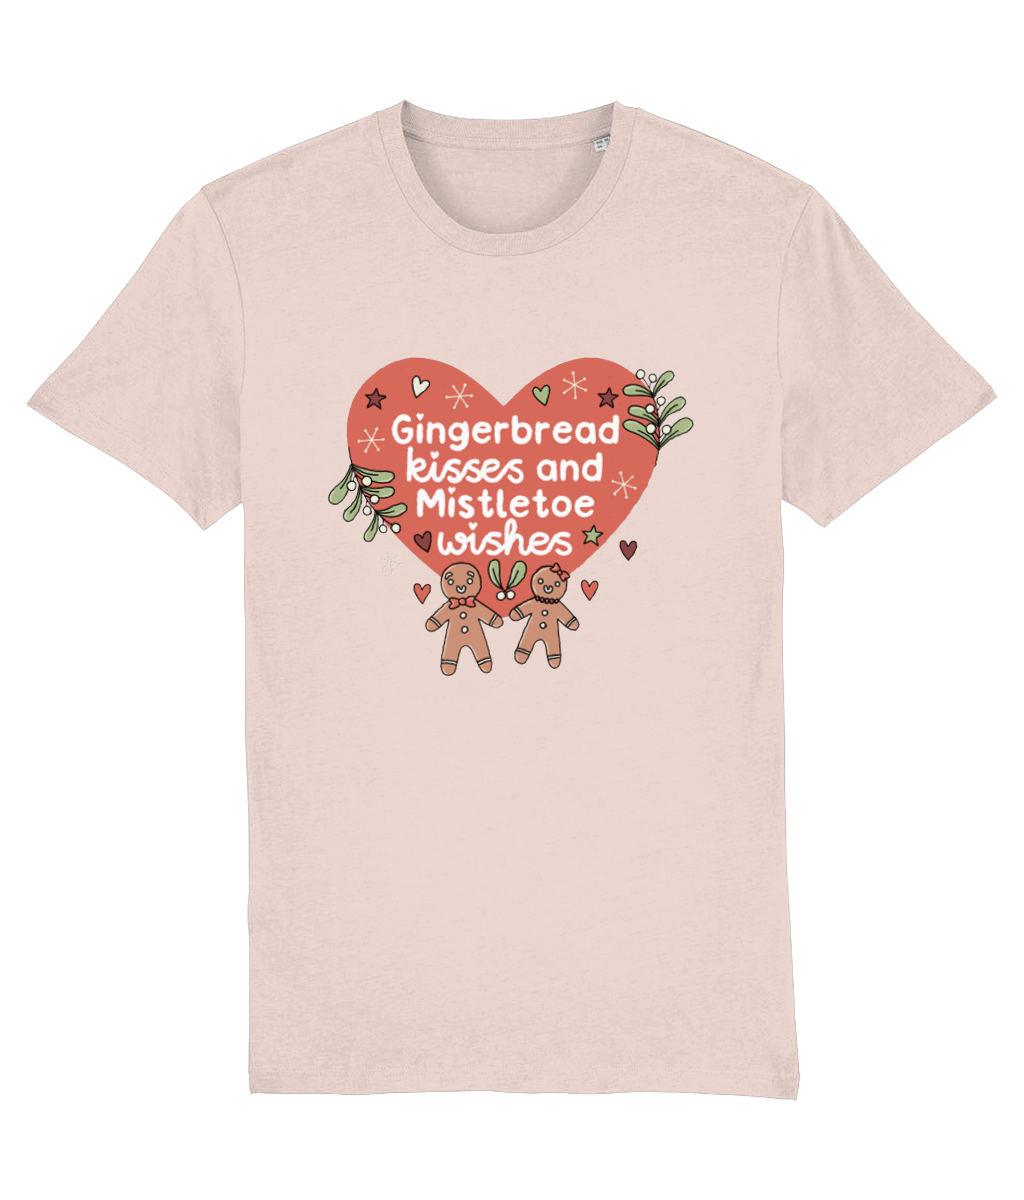 Gingerbread Kisses and Mistletoe Wishes - Adult T-Shirt - Multi Colour Available